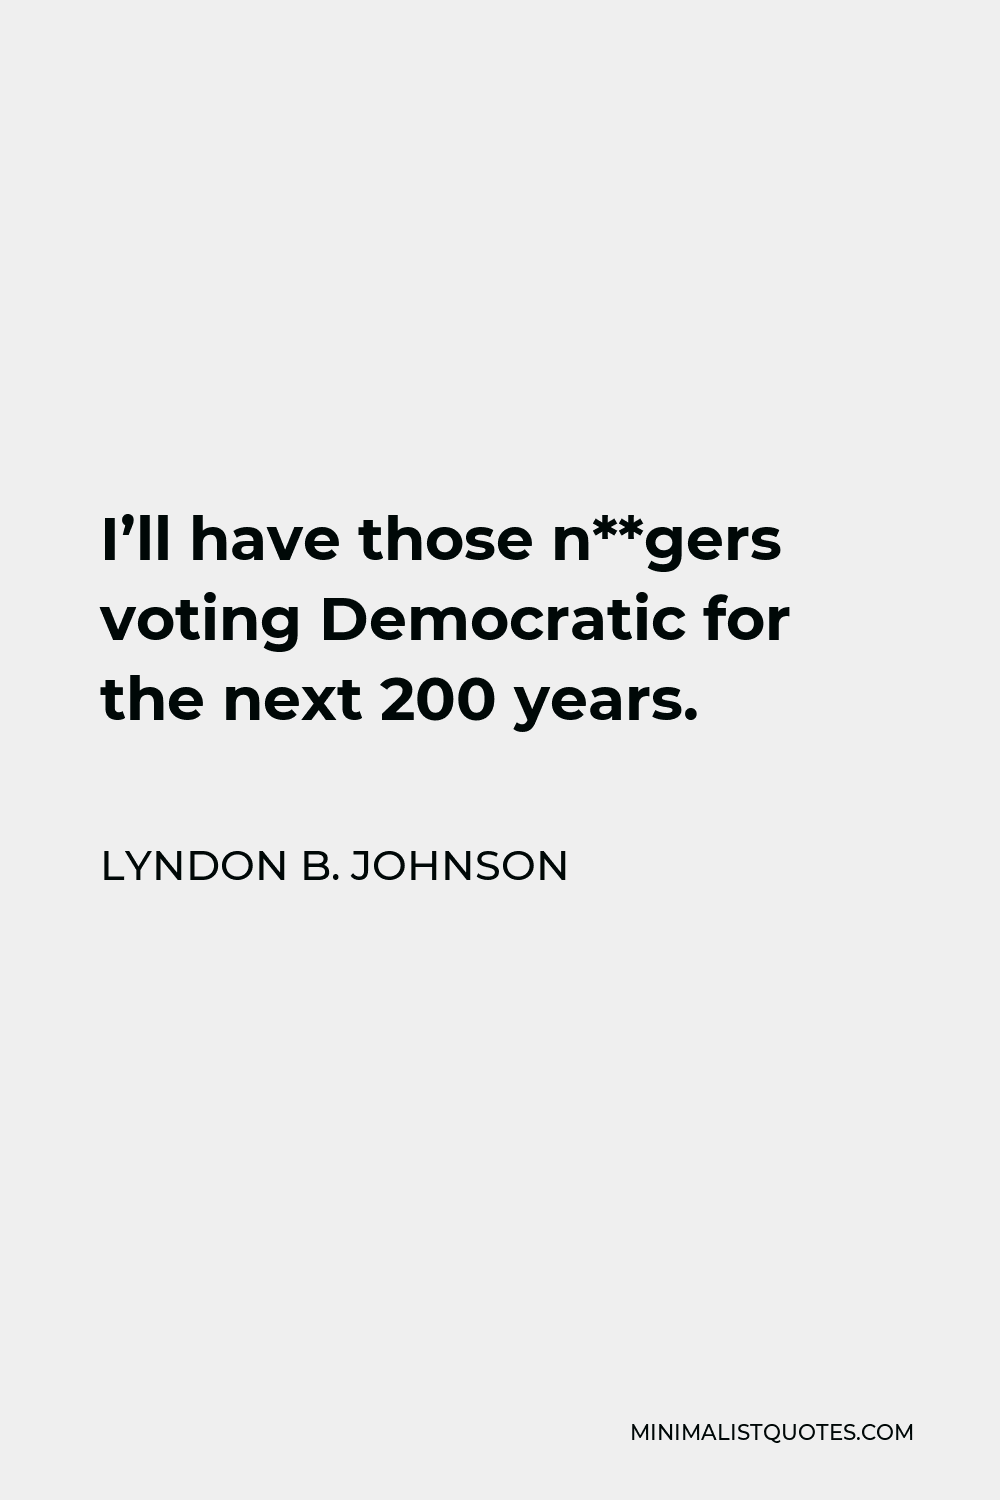 Lyndon B. Johnson Quote - I’ll have those n**gers voting Democratic for the next 200 years.